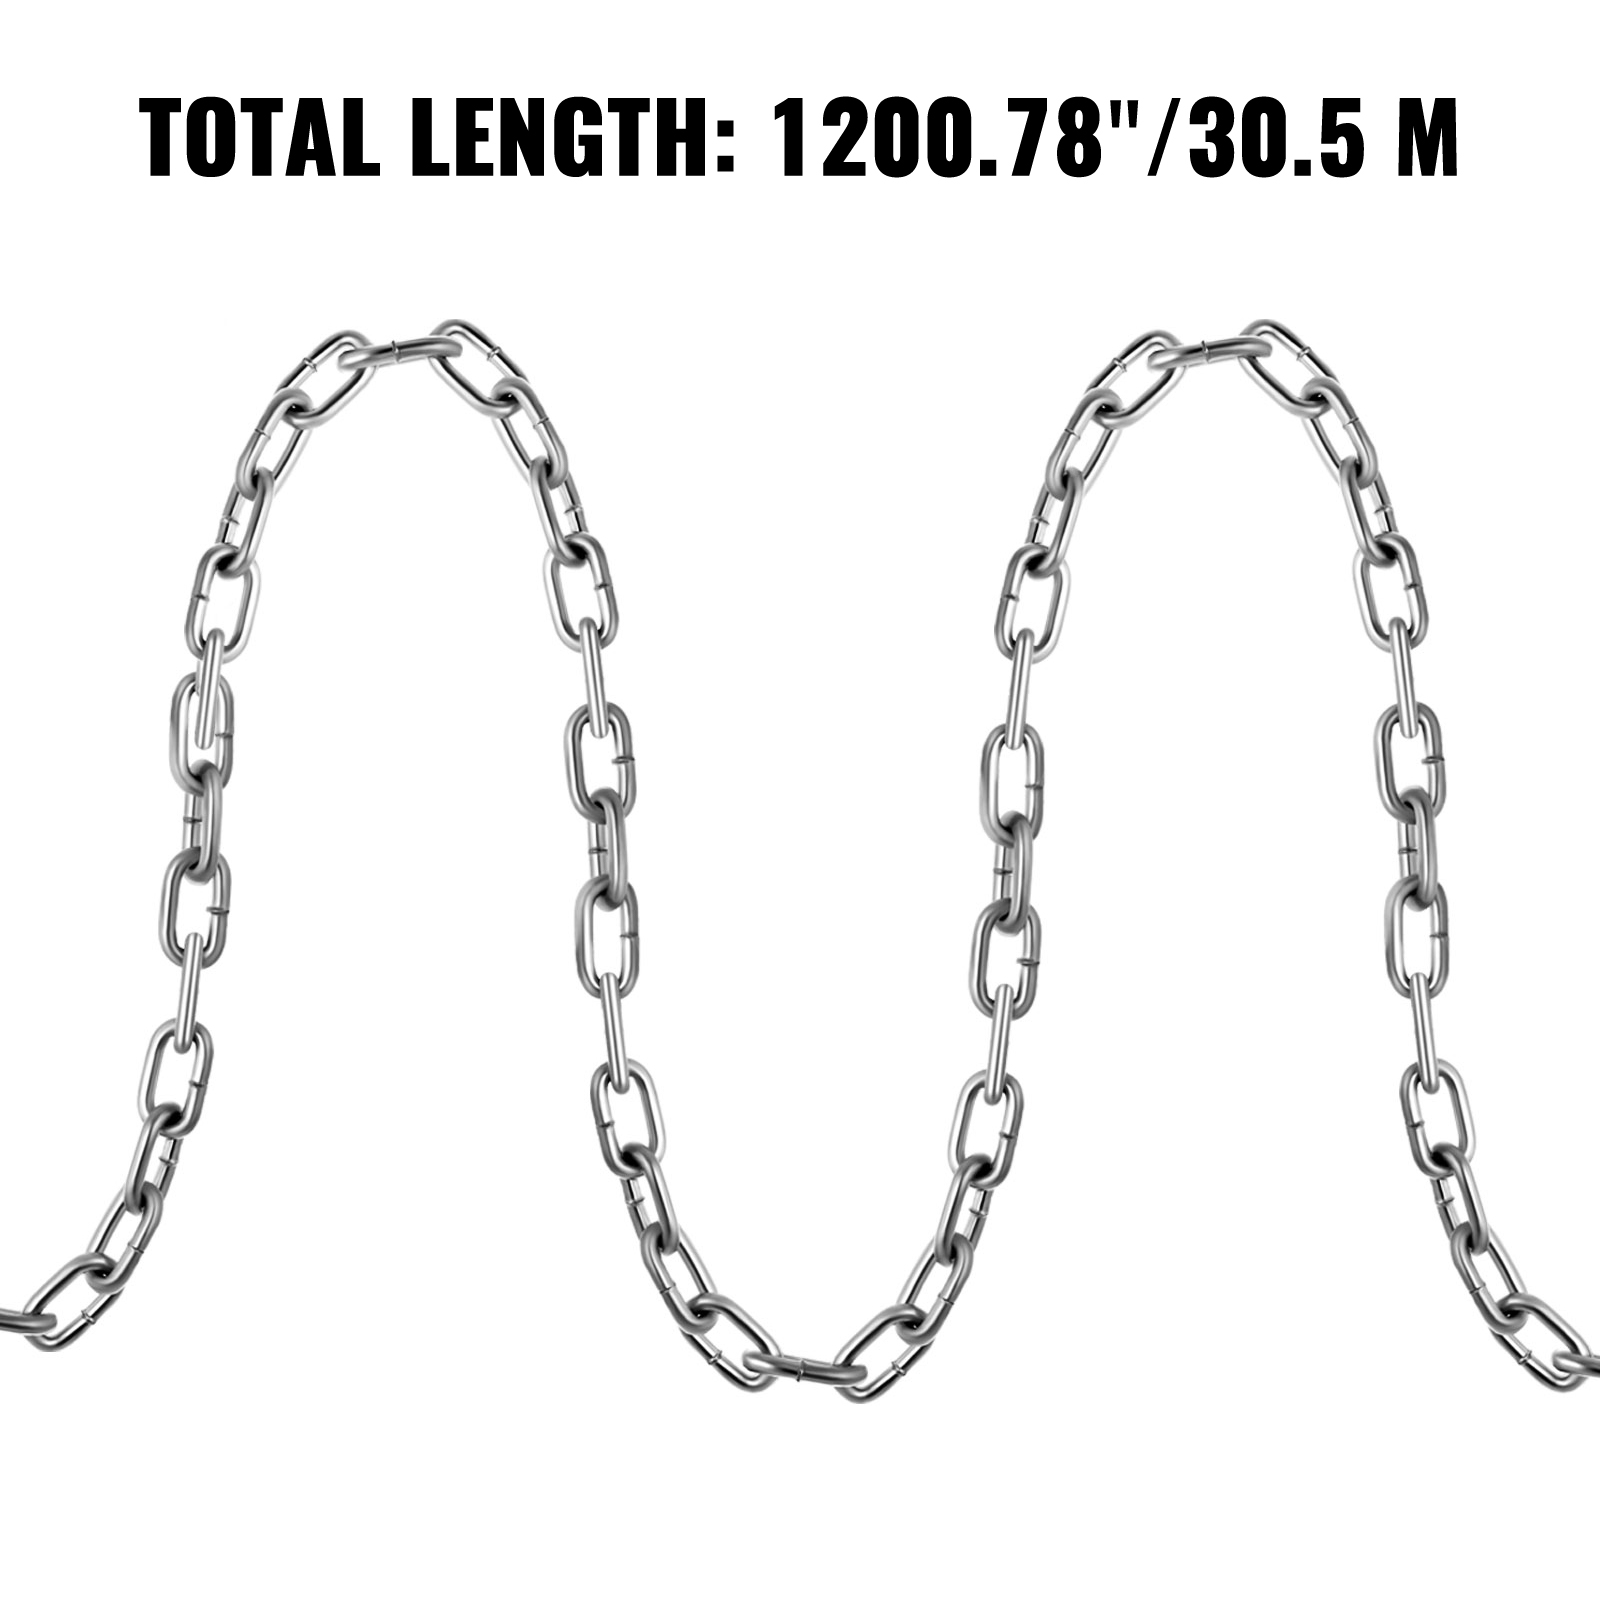 JENSWILL 1/4 inch (6mm) -6.5ft(Length) Stainless Steel 304 Chain,Metal  Chain Utility Chain Heavy Duty Chain for Guardrail, Swing, Lifting